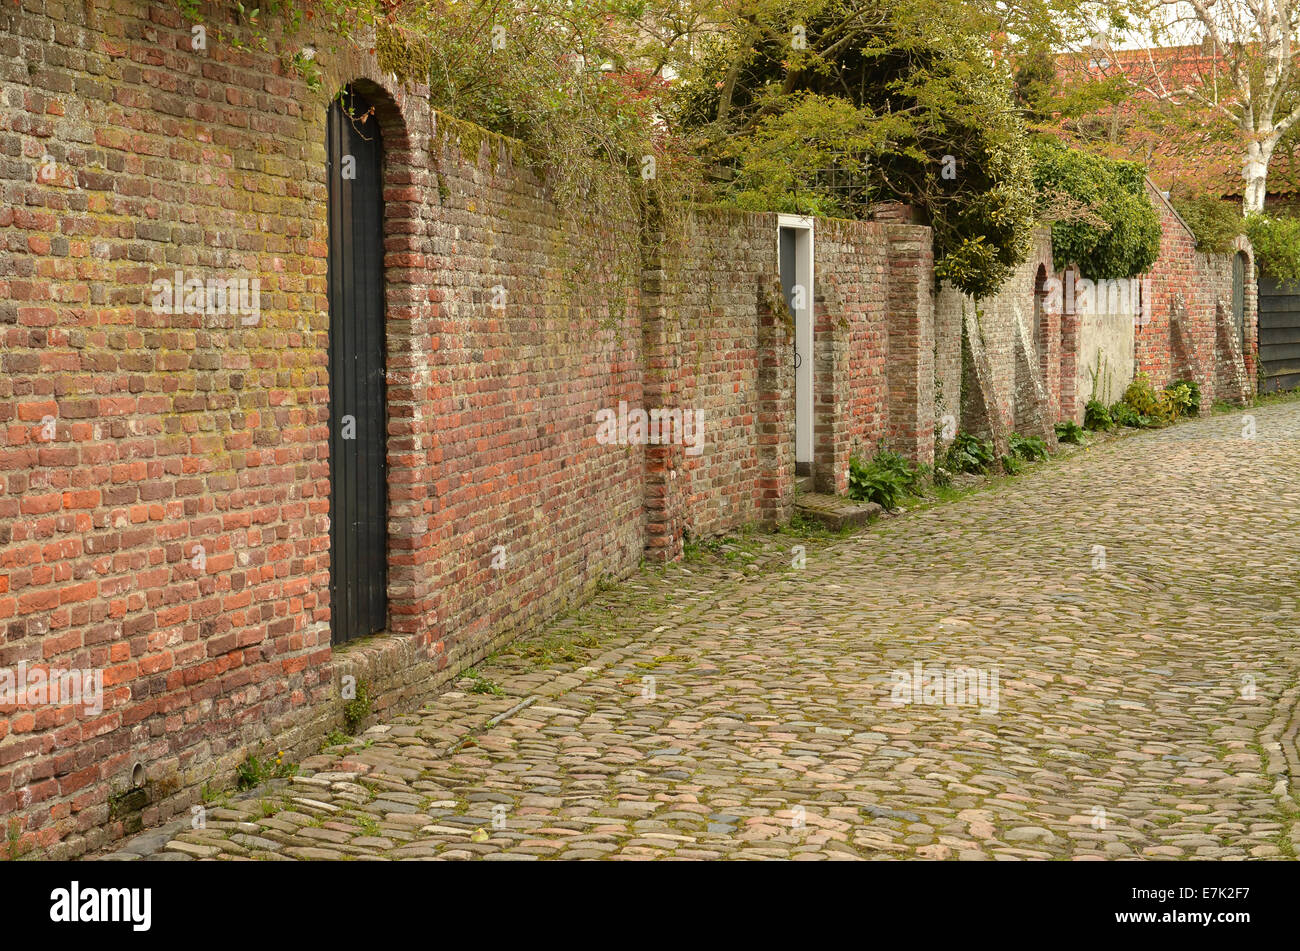 Characteristic medieval lane in the city of Veere in the Netherlands Stock Photo